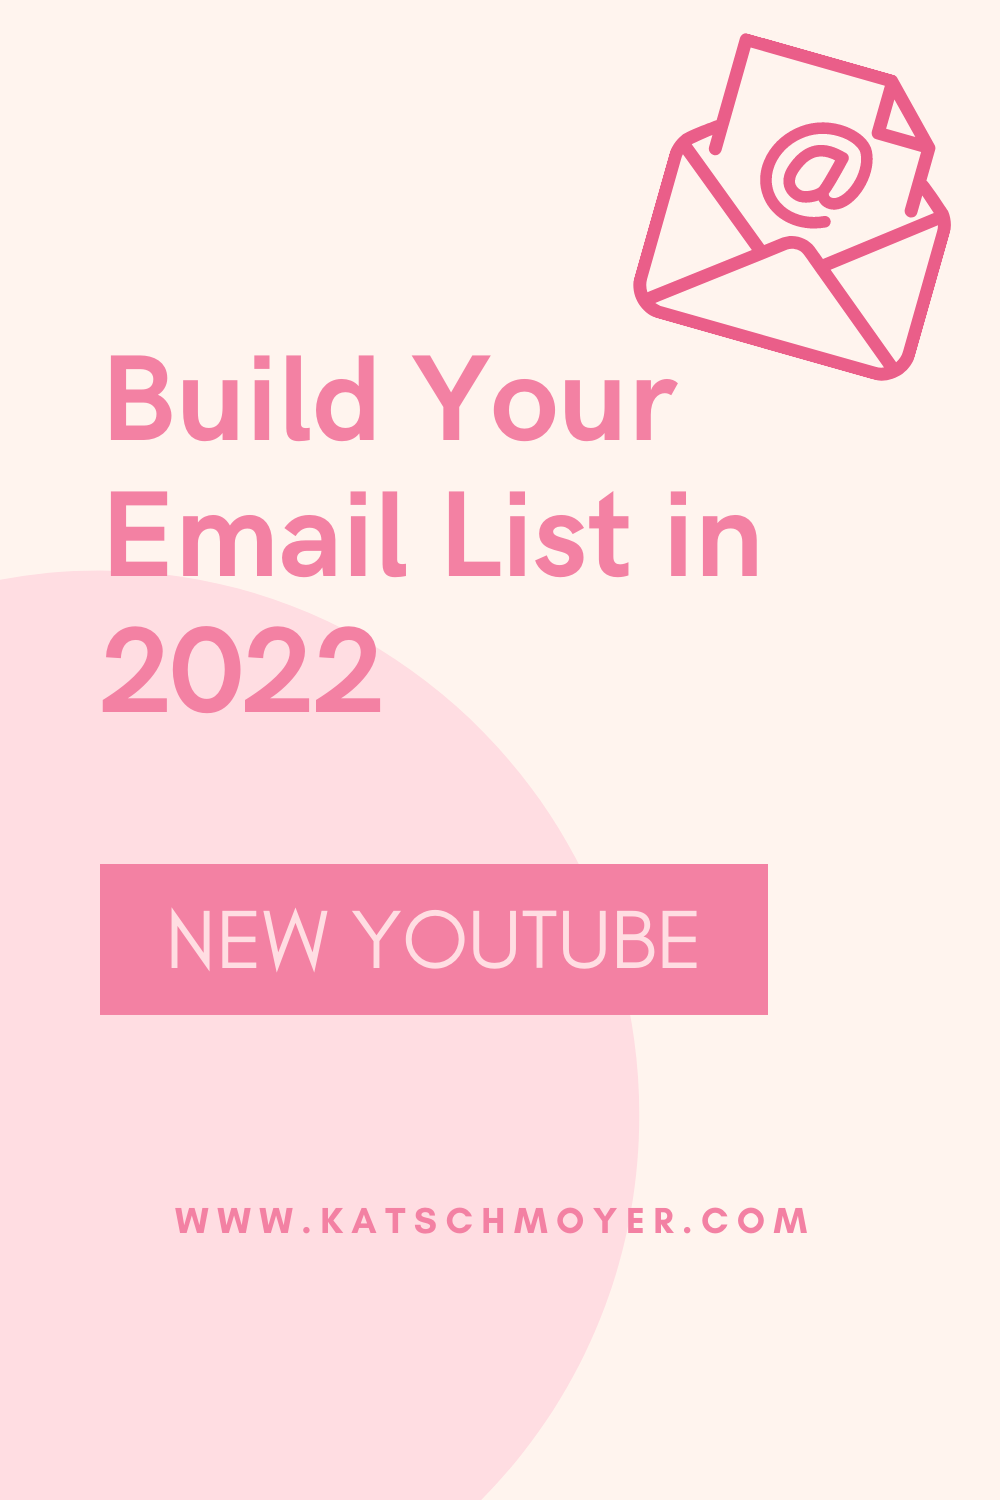 Build Your Email List in 2022